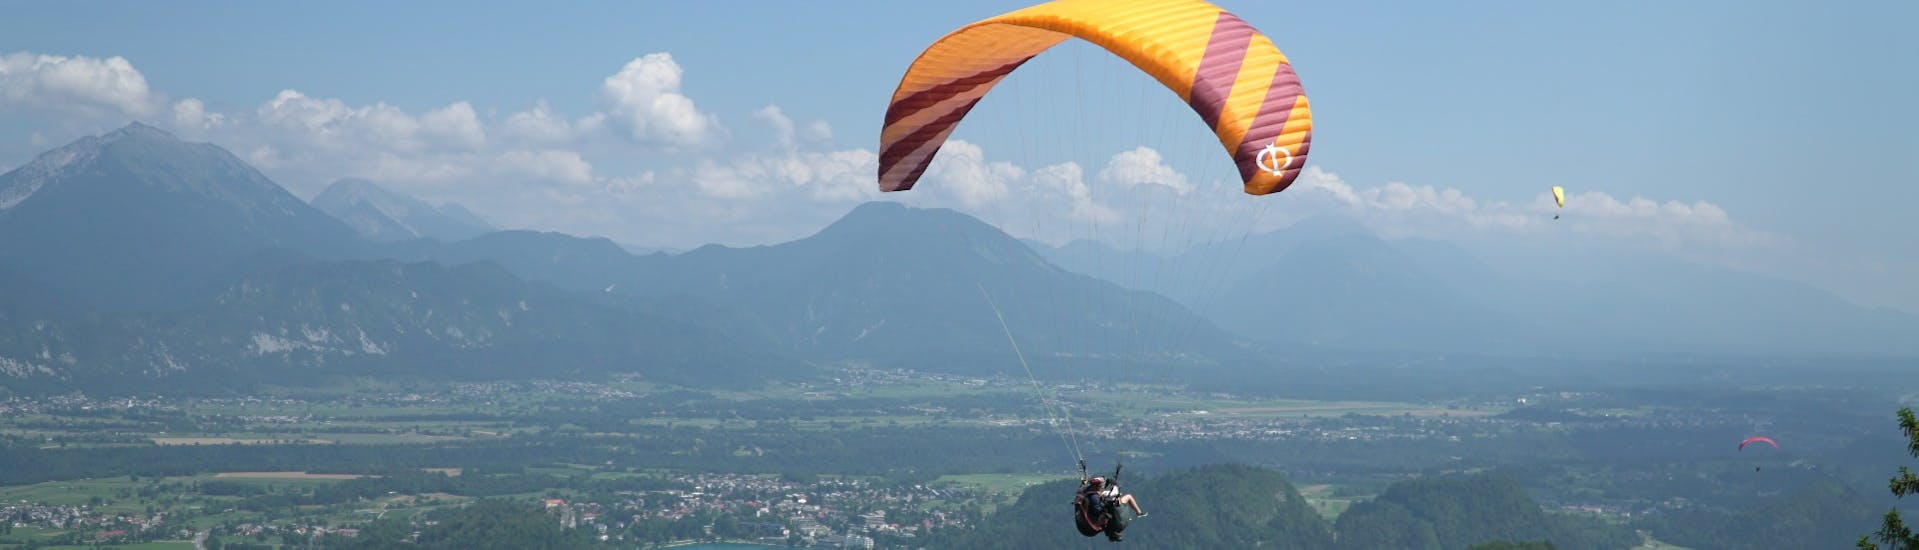 A customer and his pilot from Lake Bled Paragliding Tandem Flights surrounded by mountains and with a direct view of the lake Bled.